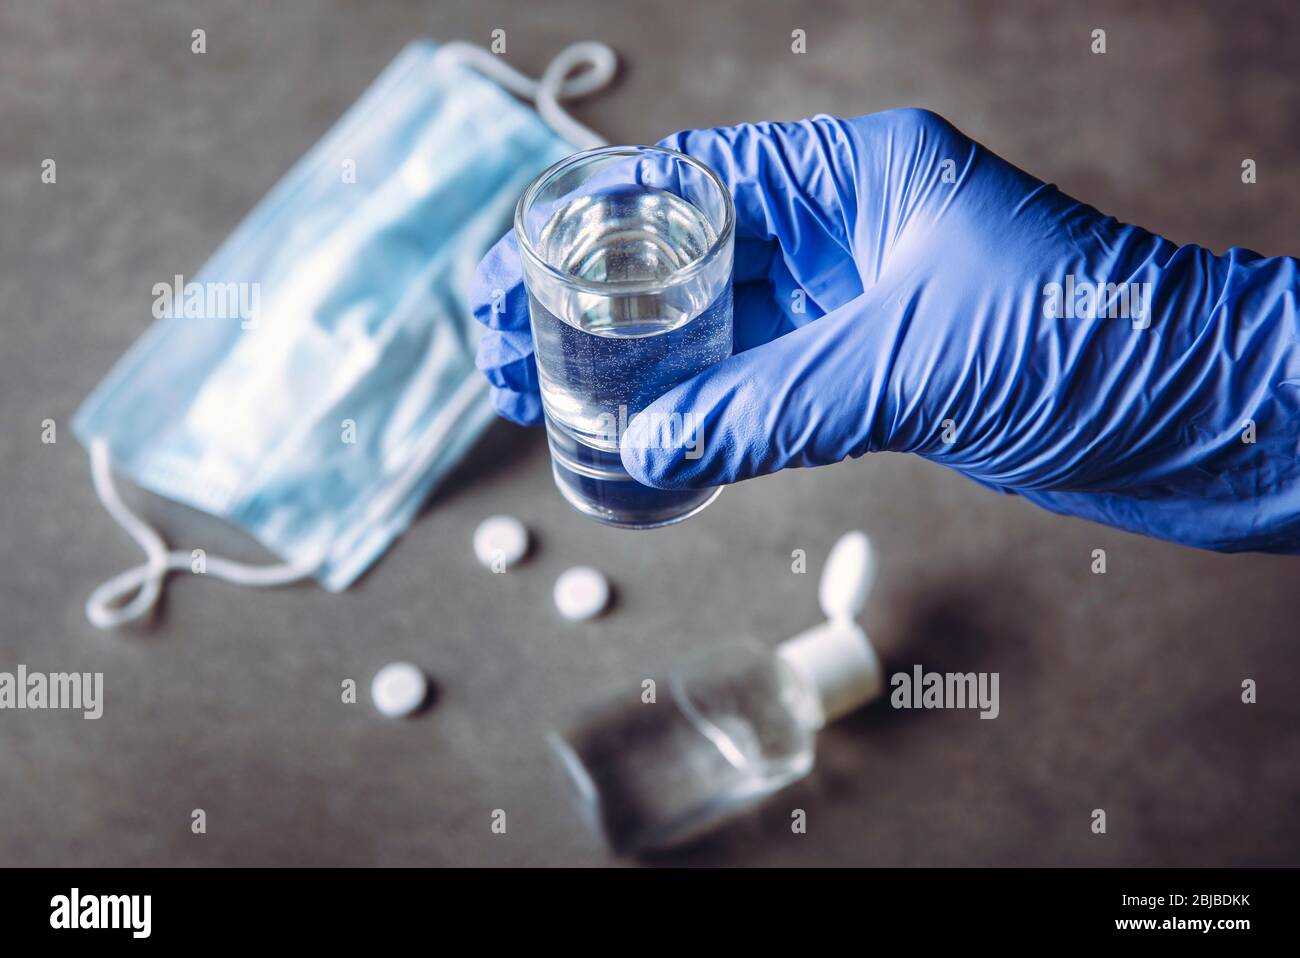 Drinking problem alcoholism during coronavirus isolation quarantine time concept. Hand with medical glove holding shot with alcohol drink. Pills, hand Stock Photo